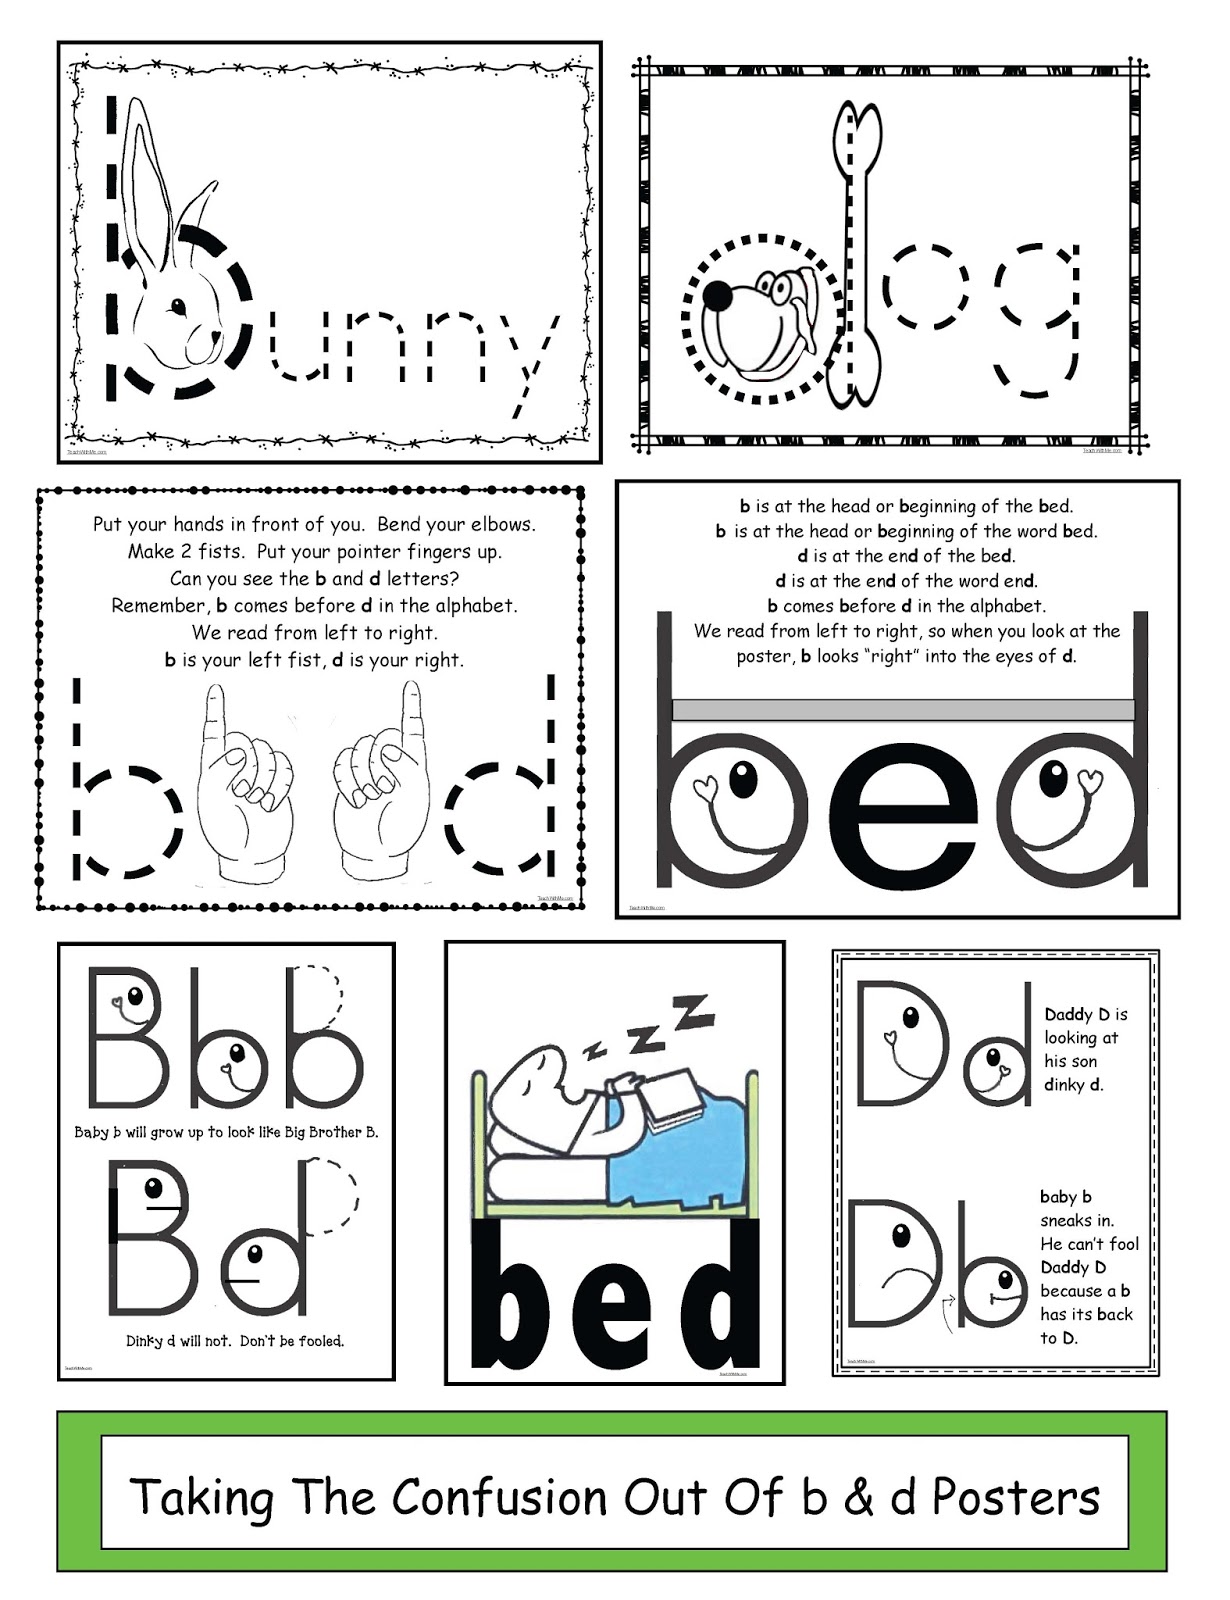 Taking the Confusion Out of b & d - Classroom Freebies